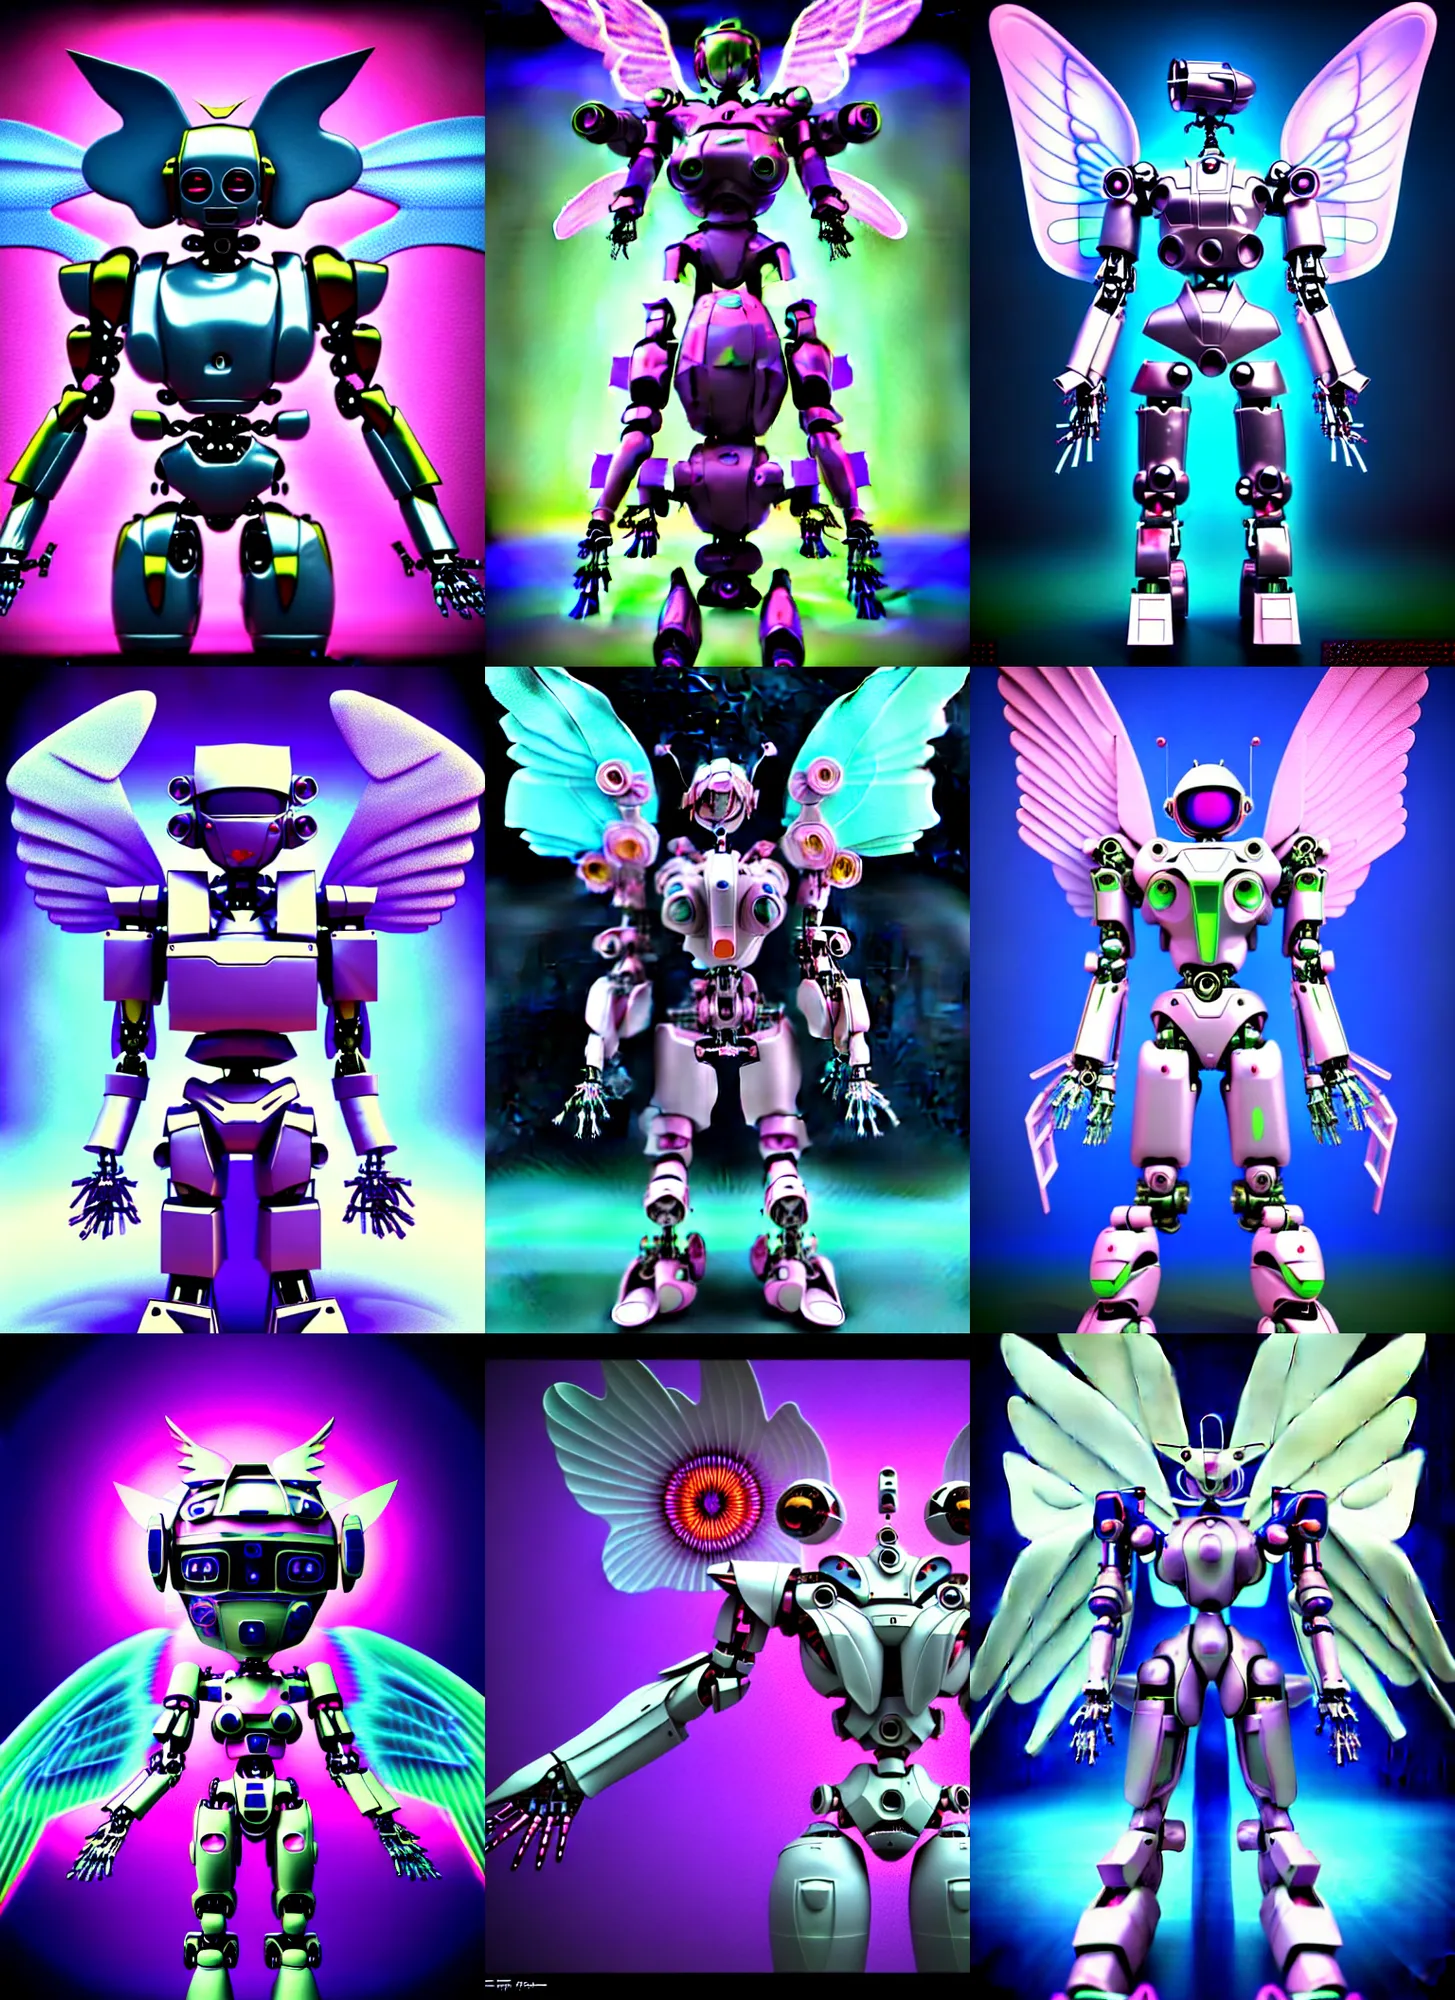 Prompt: 3 d rendered chibi cyborg mecha in the style of ichiro tanida by micha klein by phil wolstenholme 3 dimensional render wearing angel wings against a psychedelic acid trip swirly background with 3 d rendered butterflies and 3 d rendered flowers n the style of 1 9 9 0's cg graphics 3 d rendered y 2 k aesthetic by ichiro tanida, 3 do magazine